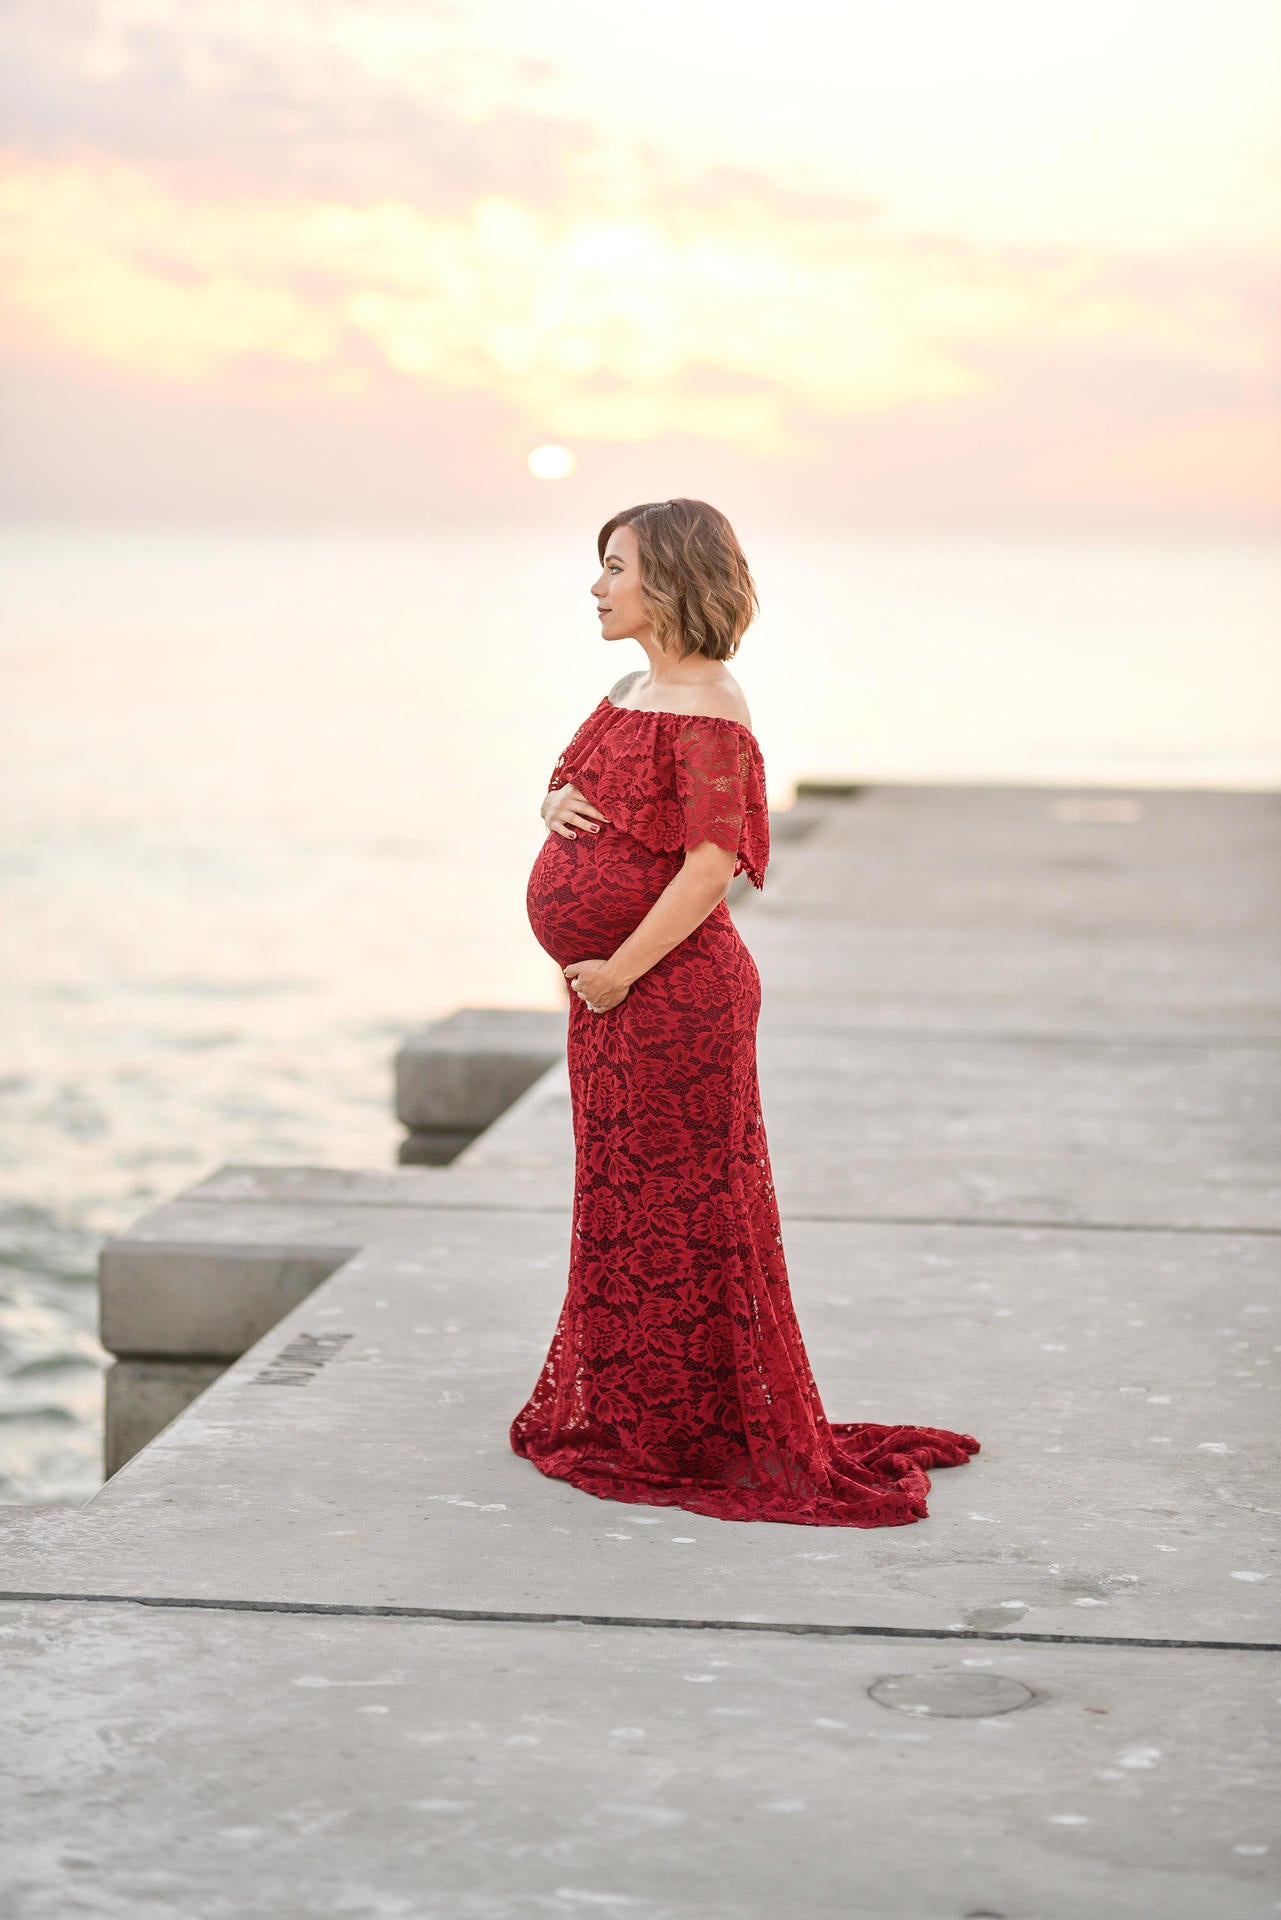 Maternity Photography Props Maxi Lace Pregnancy Dress